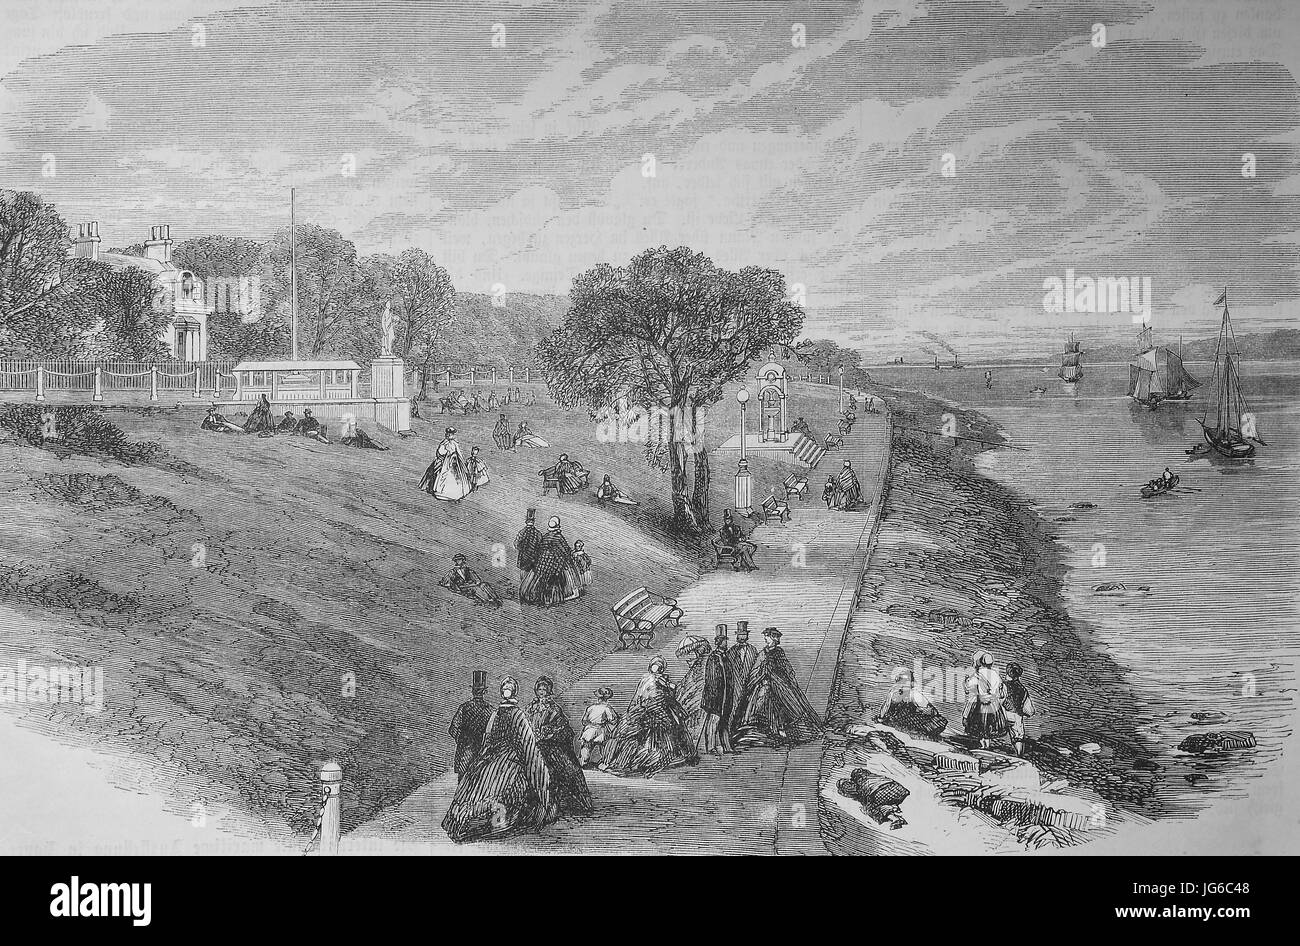 Digital improved:, view of the coast of Cowes, an English seaport town and civil parish on the Isle of Wight, promenaders, illustration from the 19th century Stock Photo